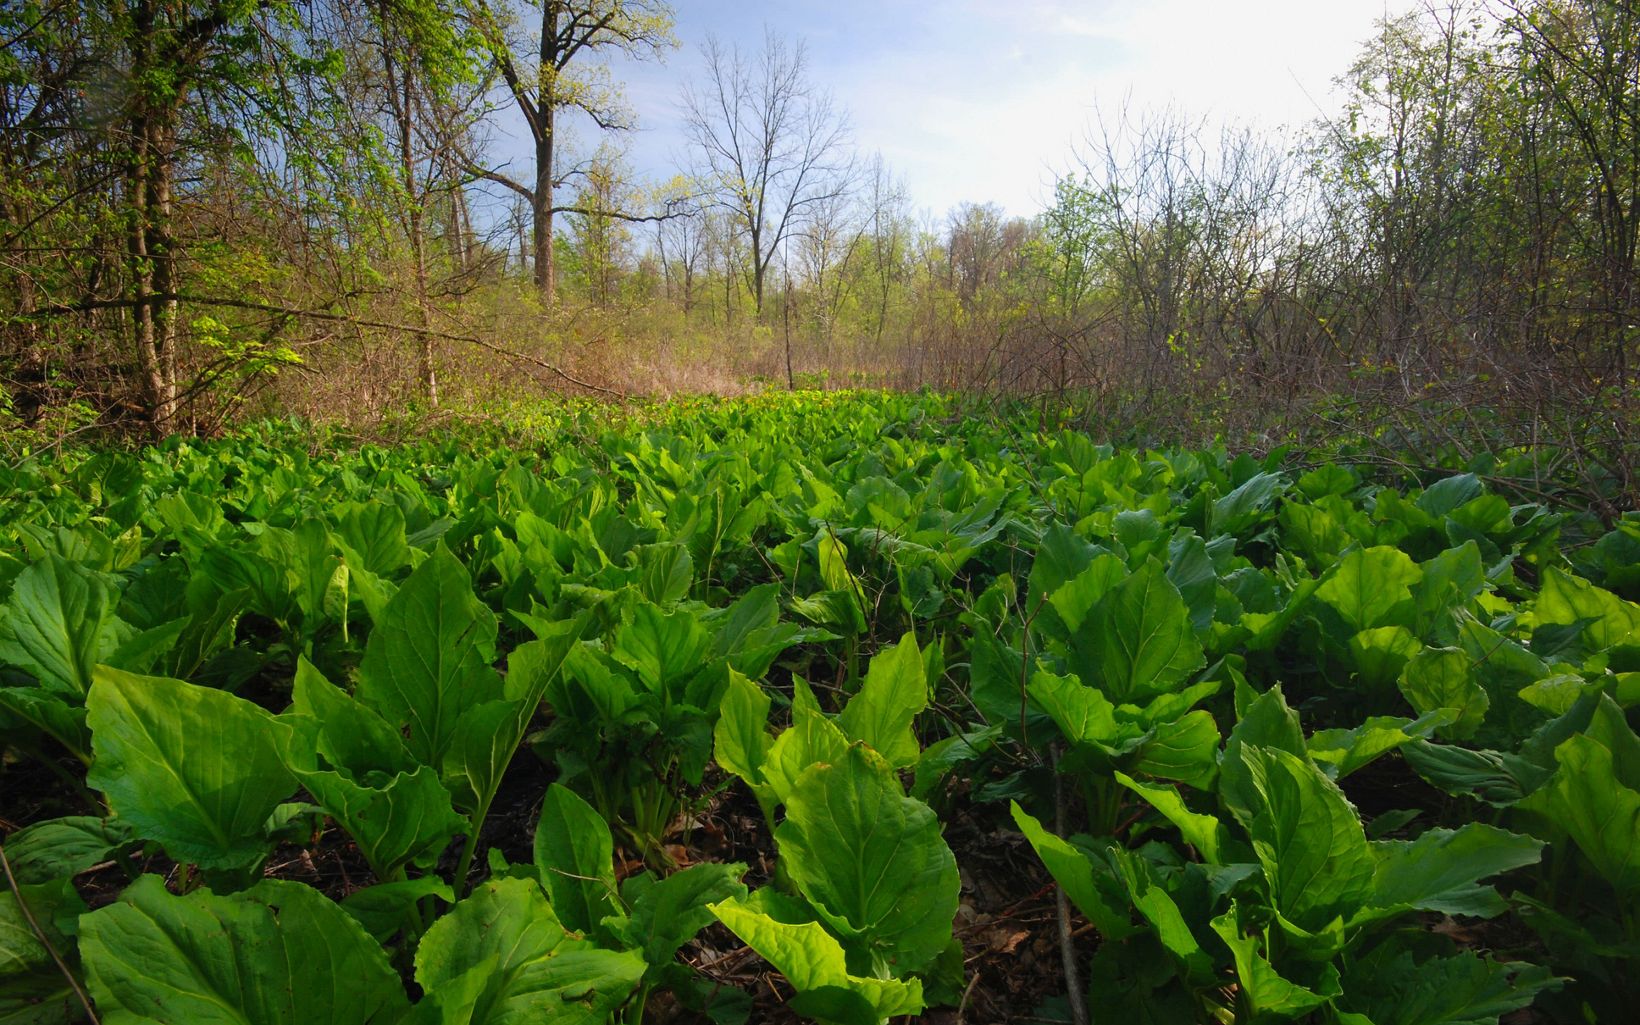 Native Plants Healthy wetlands support plant species such as marsh marigold, skunk cabbage, trillium, jack-in-the-pulpit and cottonwood.  © Randall Schieber